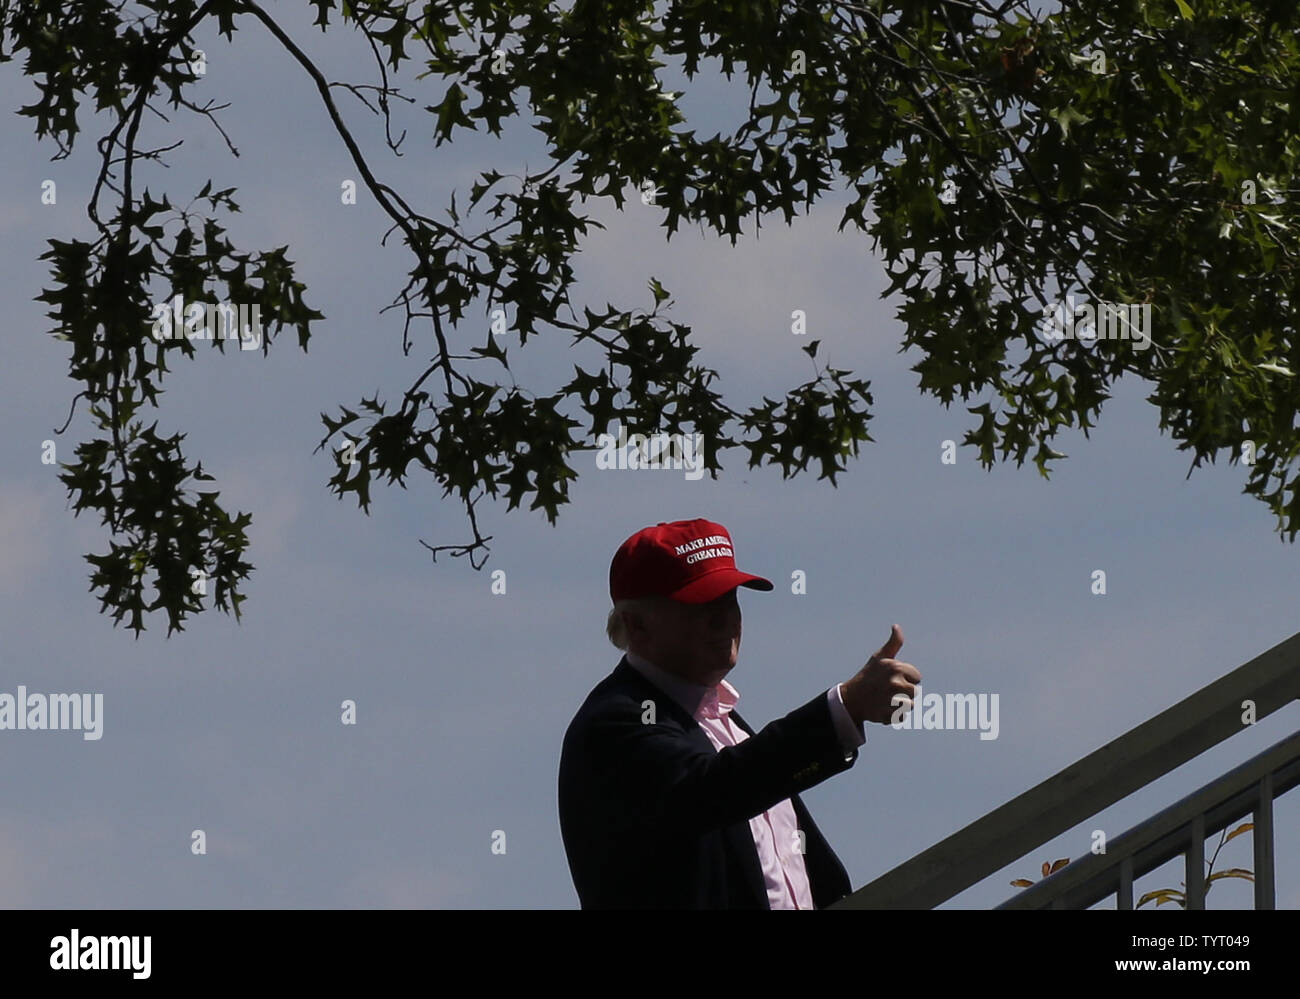 United States President Donald Trump gives a thumbs up when he arrives at Trump National Golf Club for the final round of the LPGA U.S. Women's Open Championship  in Bedminster, NJ on July 14, 2017.     Photo by John Angelillo/UPI Stock Photo